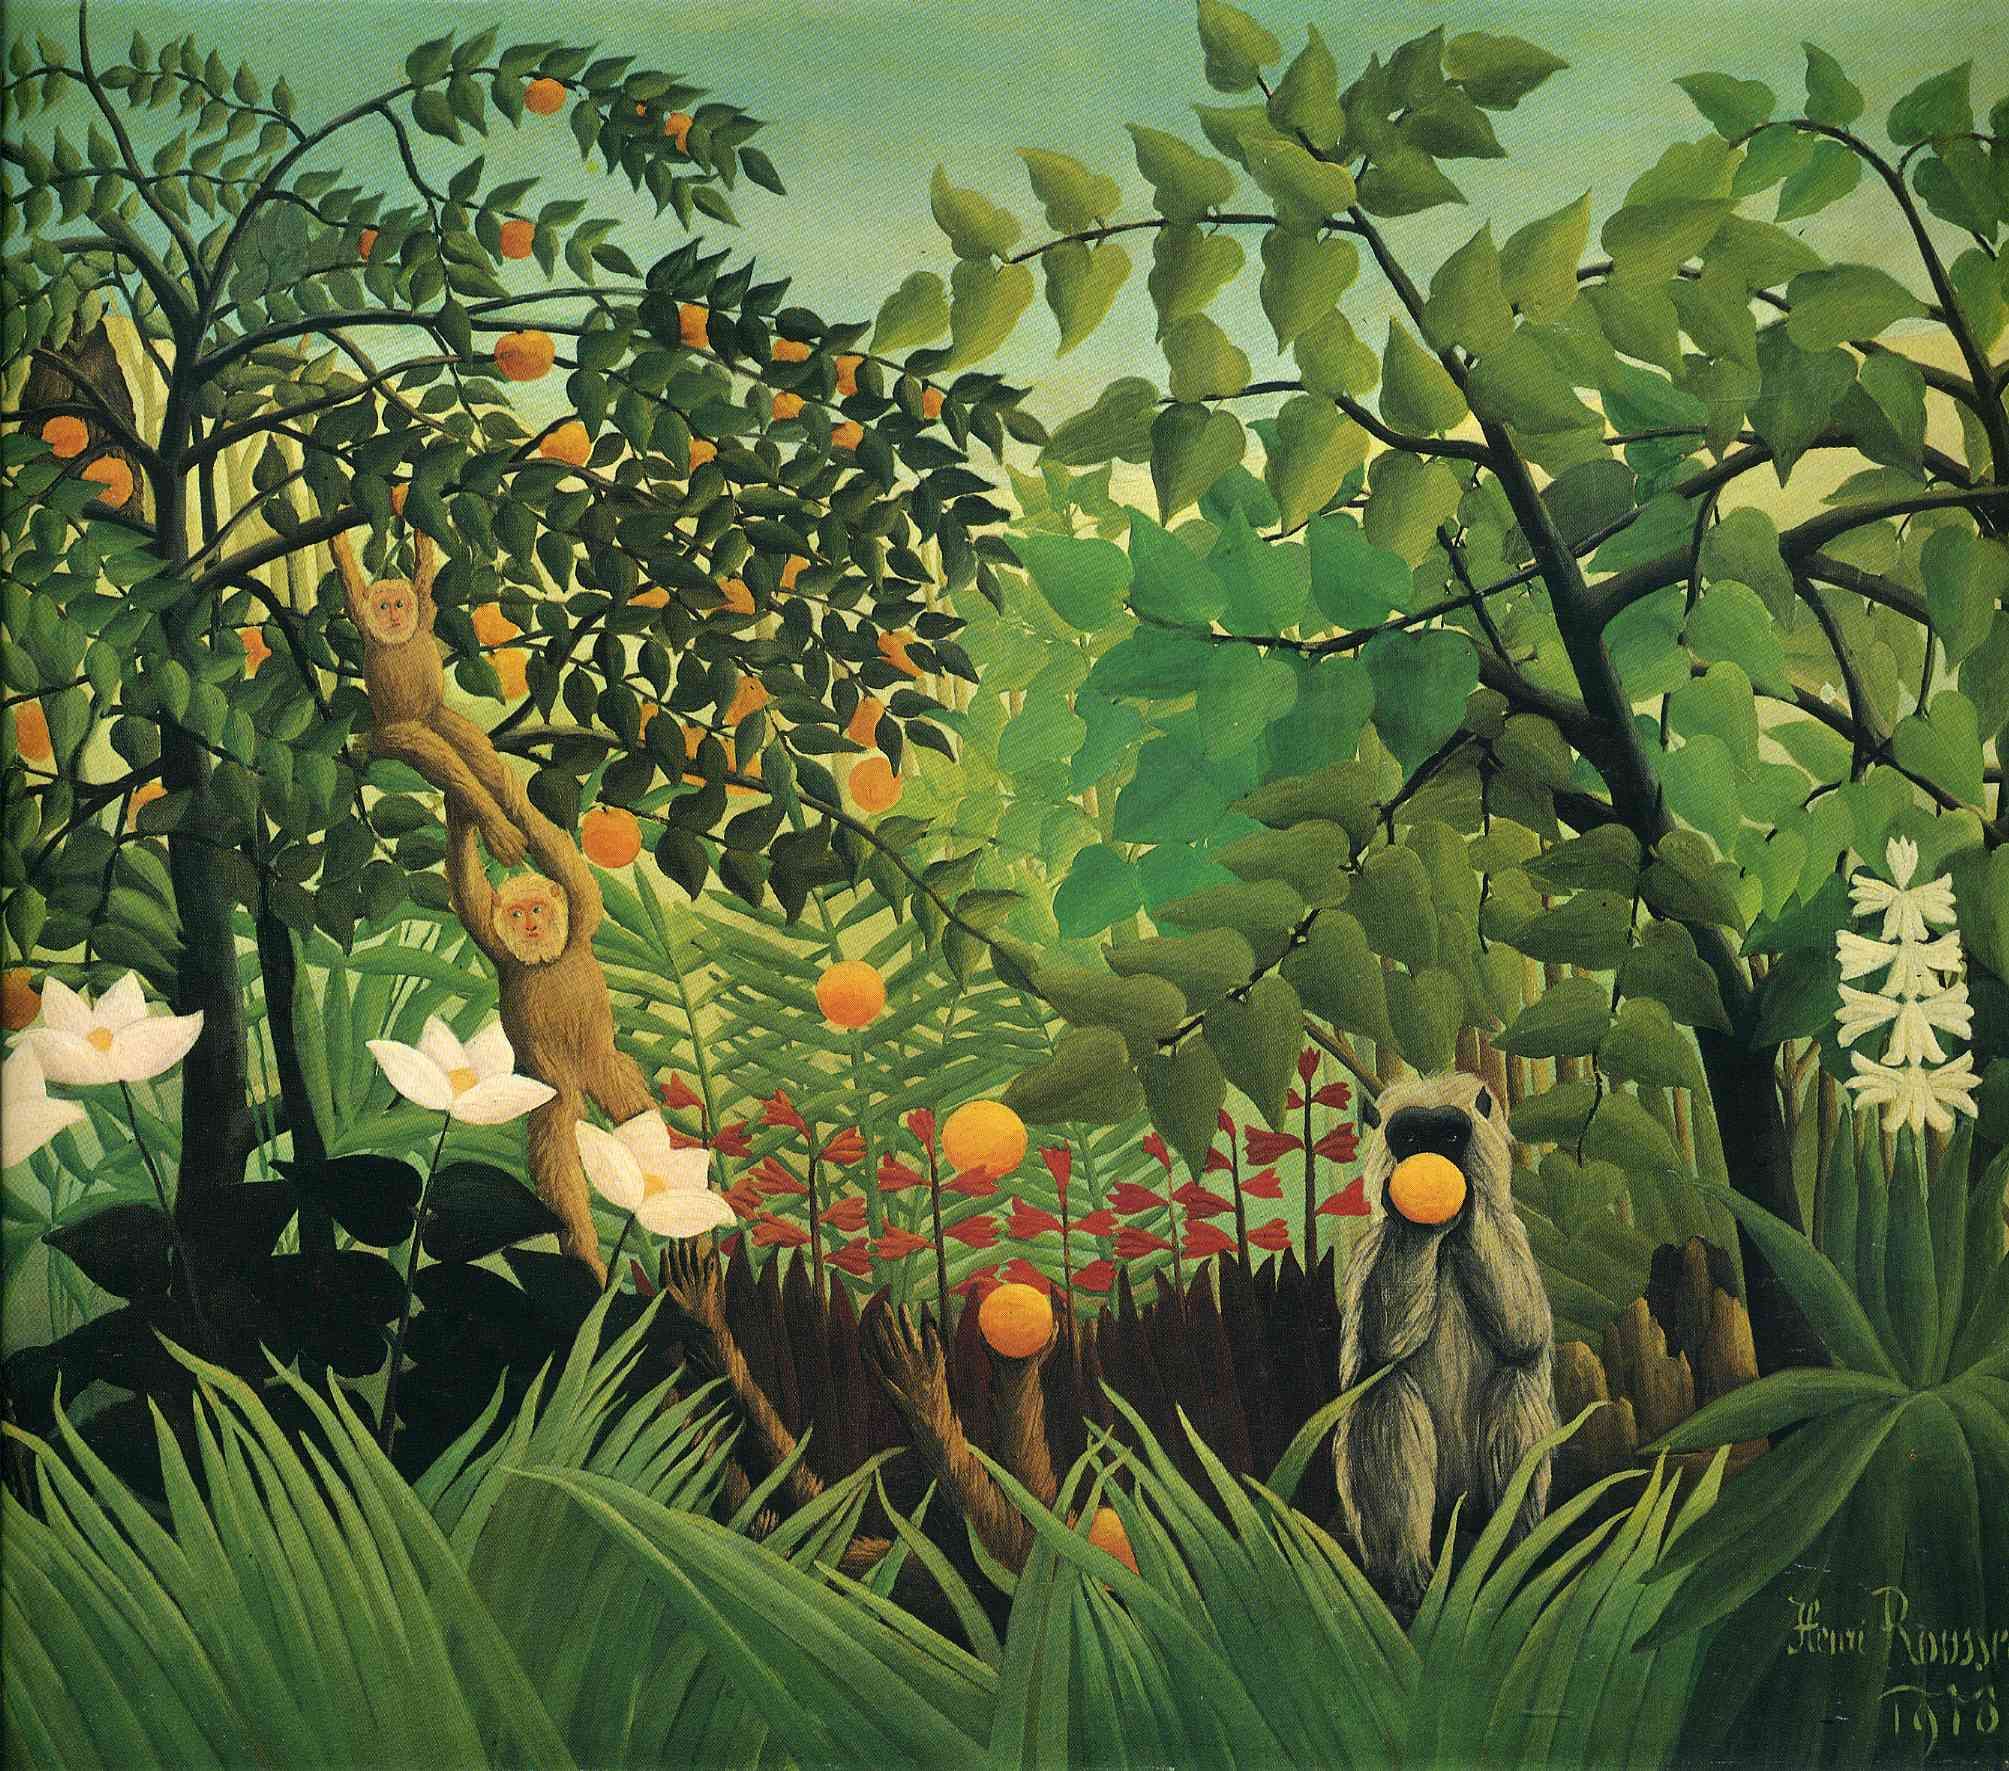 Here is The Truth About Henri Rousseau's Famous Animal Paintings